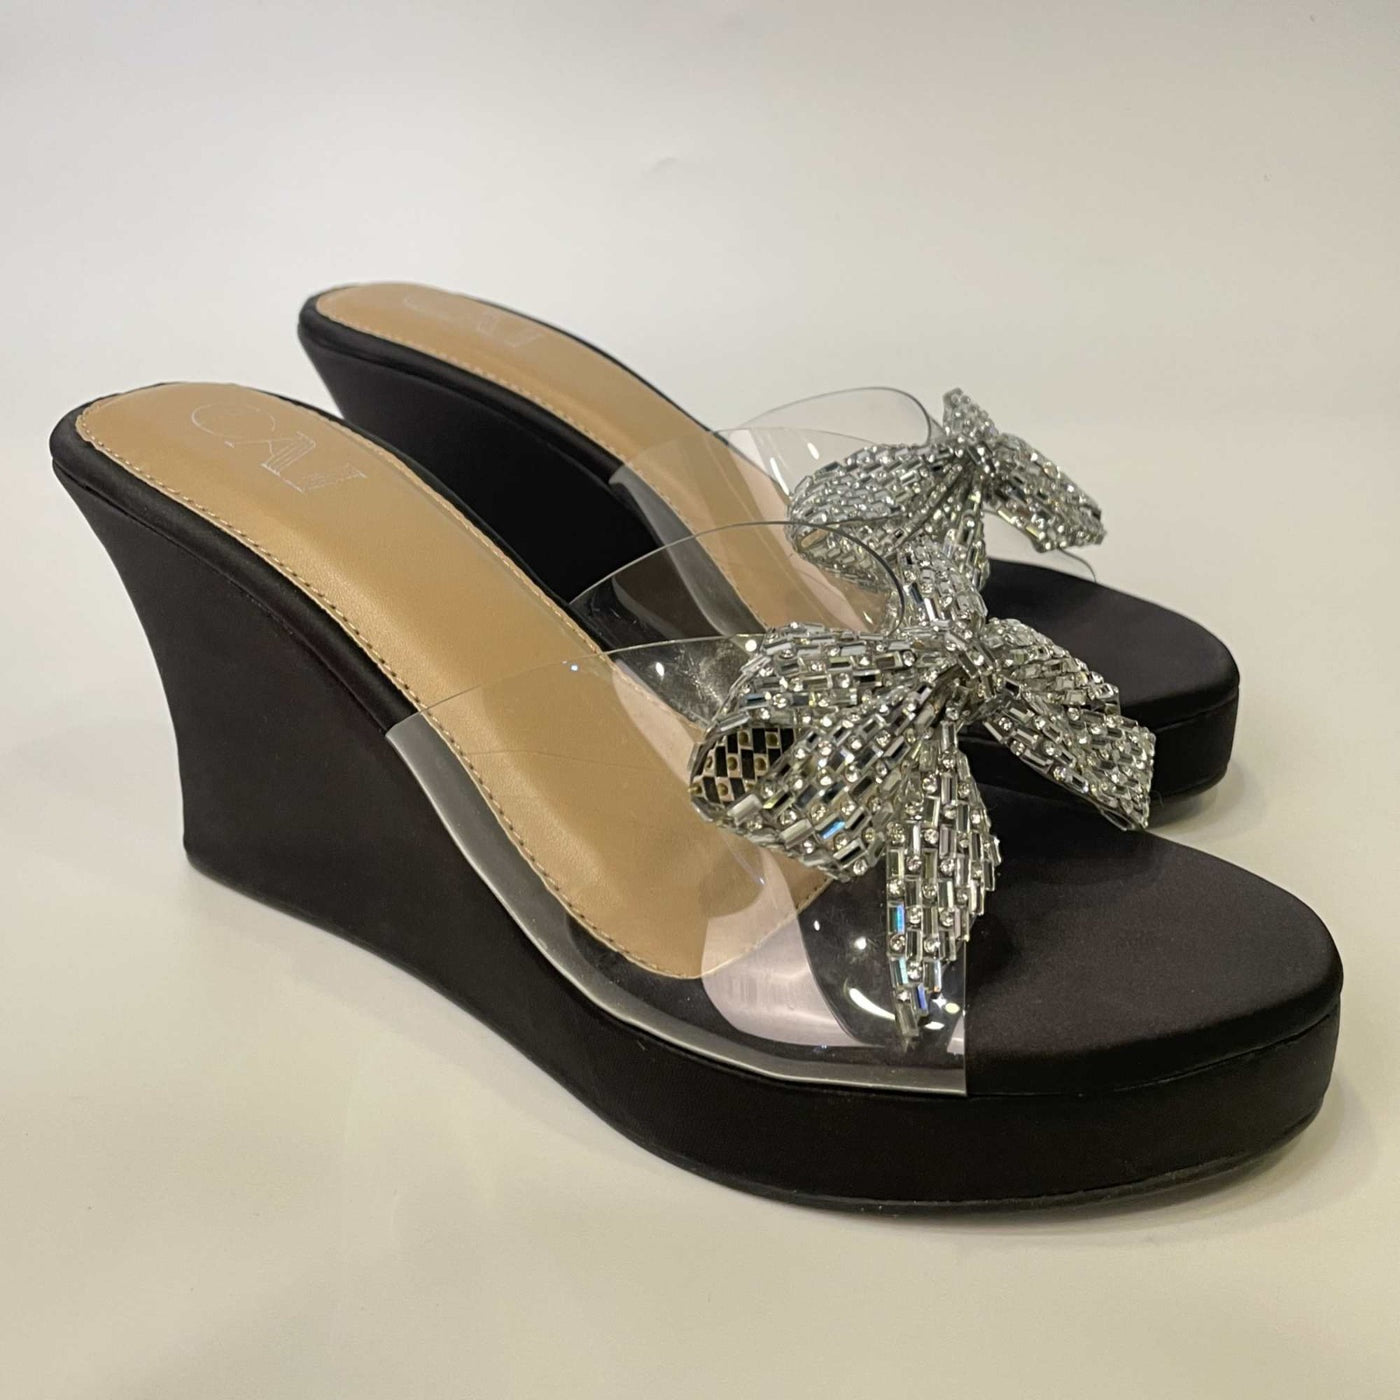 Silver Bow Black Wedge